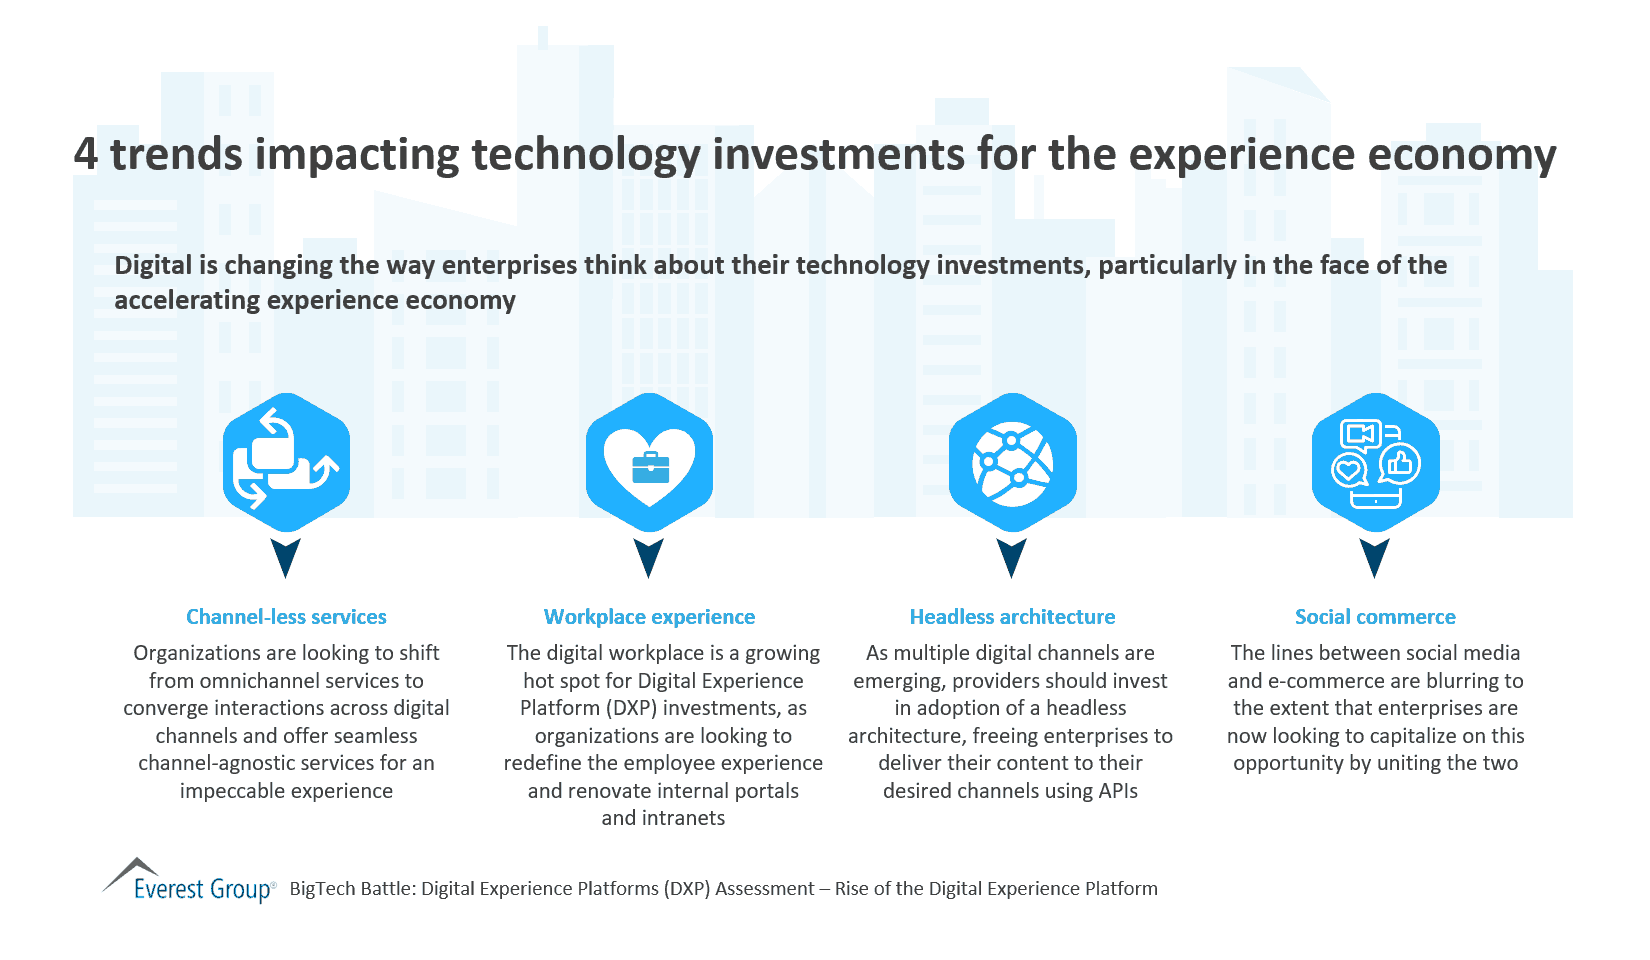 4 trends impacting technology investments for the experience economy